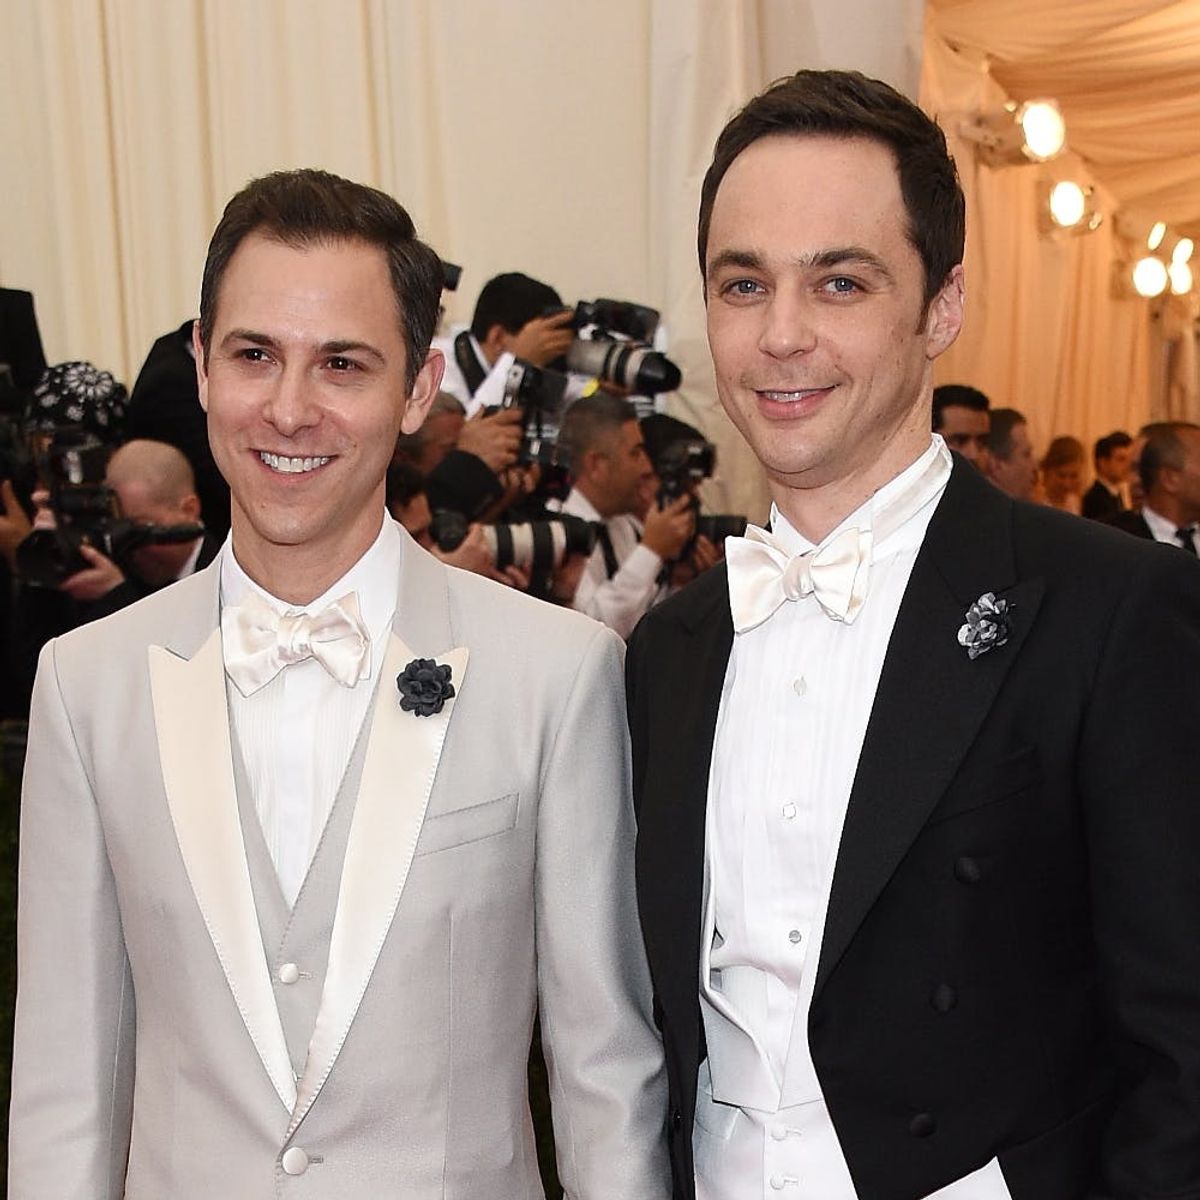 Big Bang Theory Star Jim Parsons Just Walked Down the Aisle With His Longtime Love Todd Spiewak